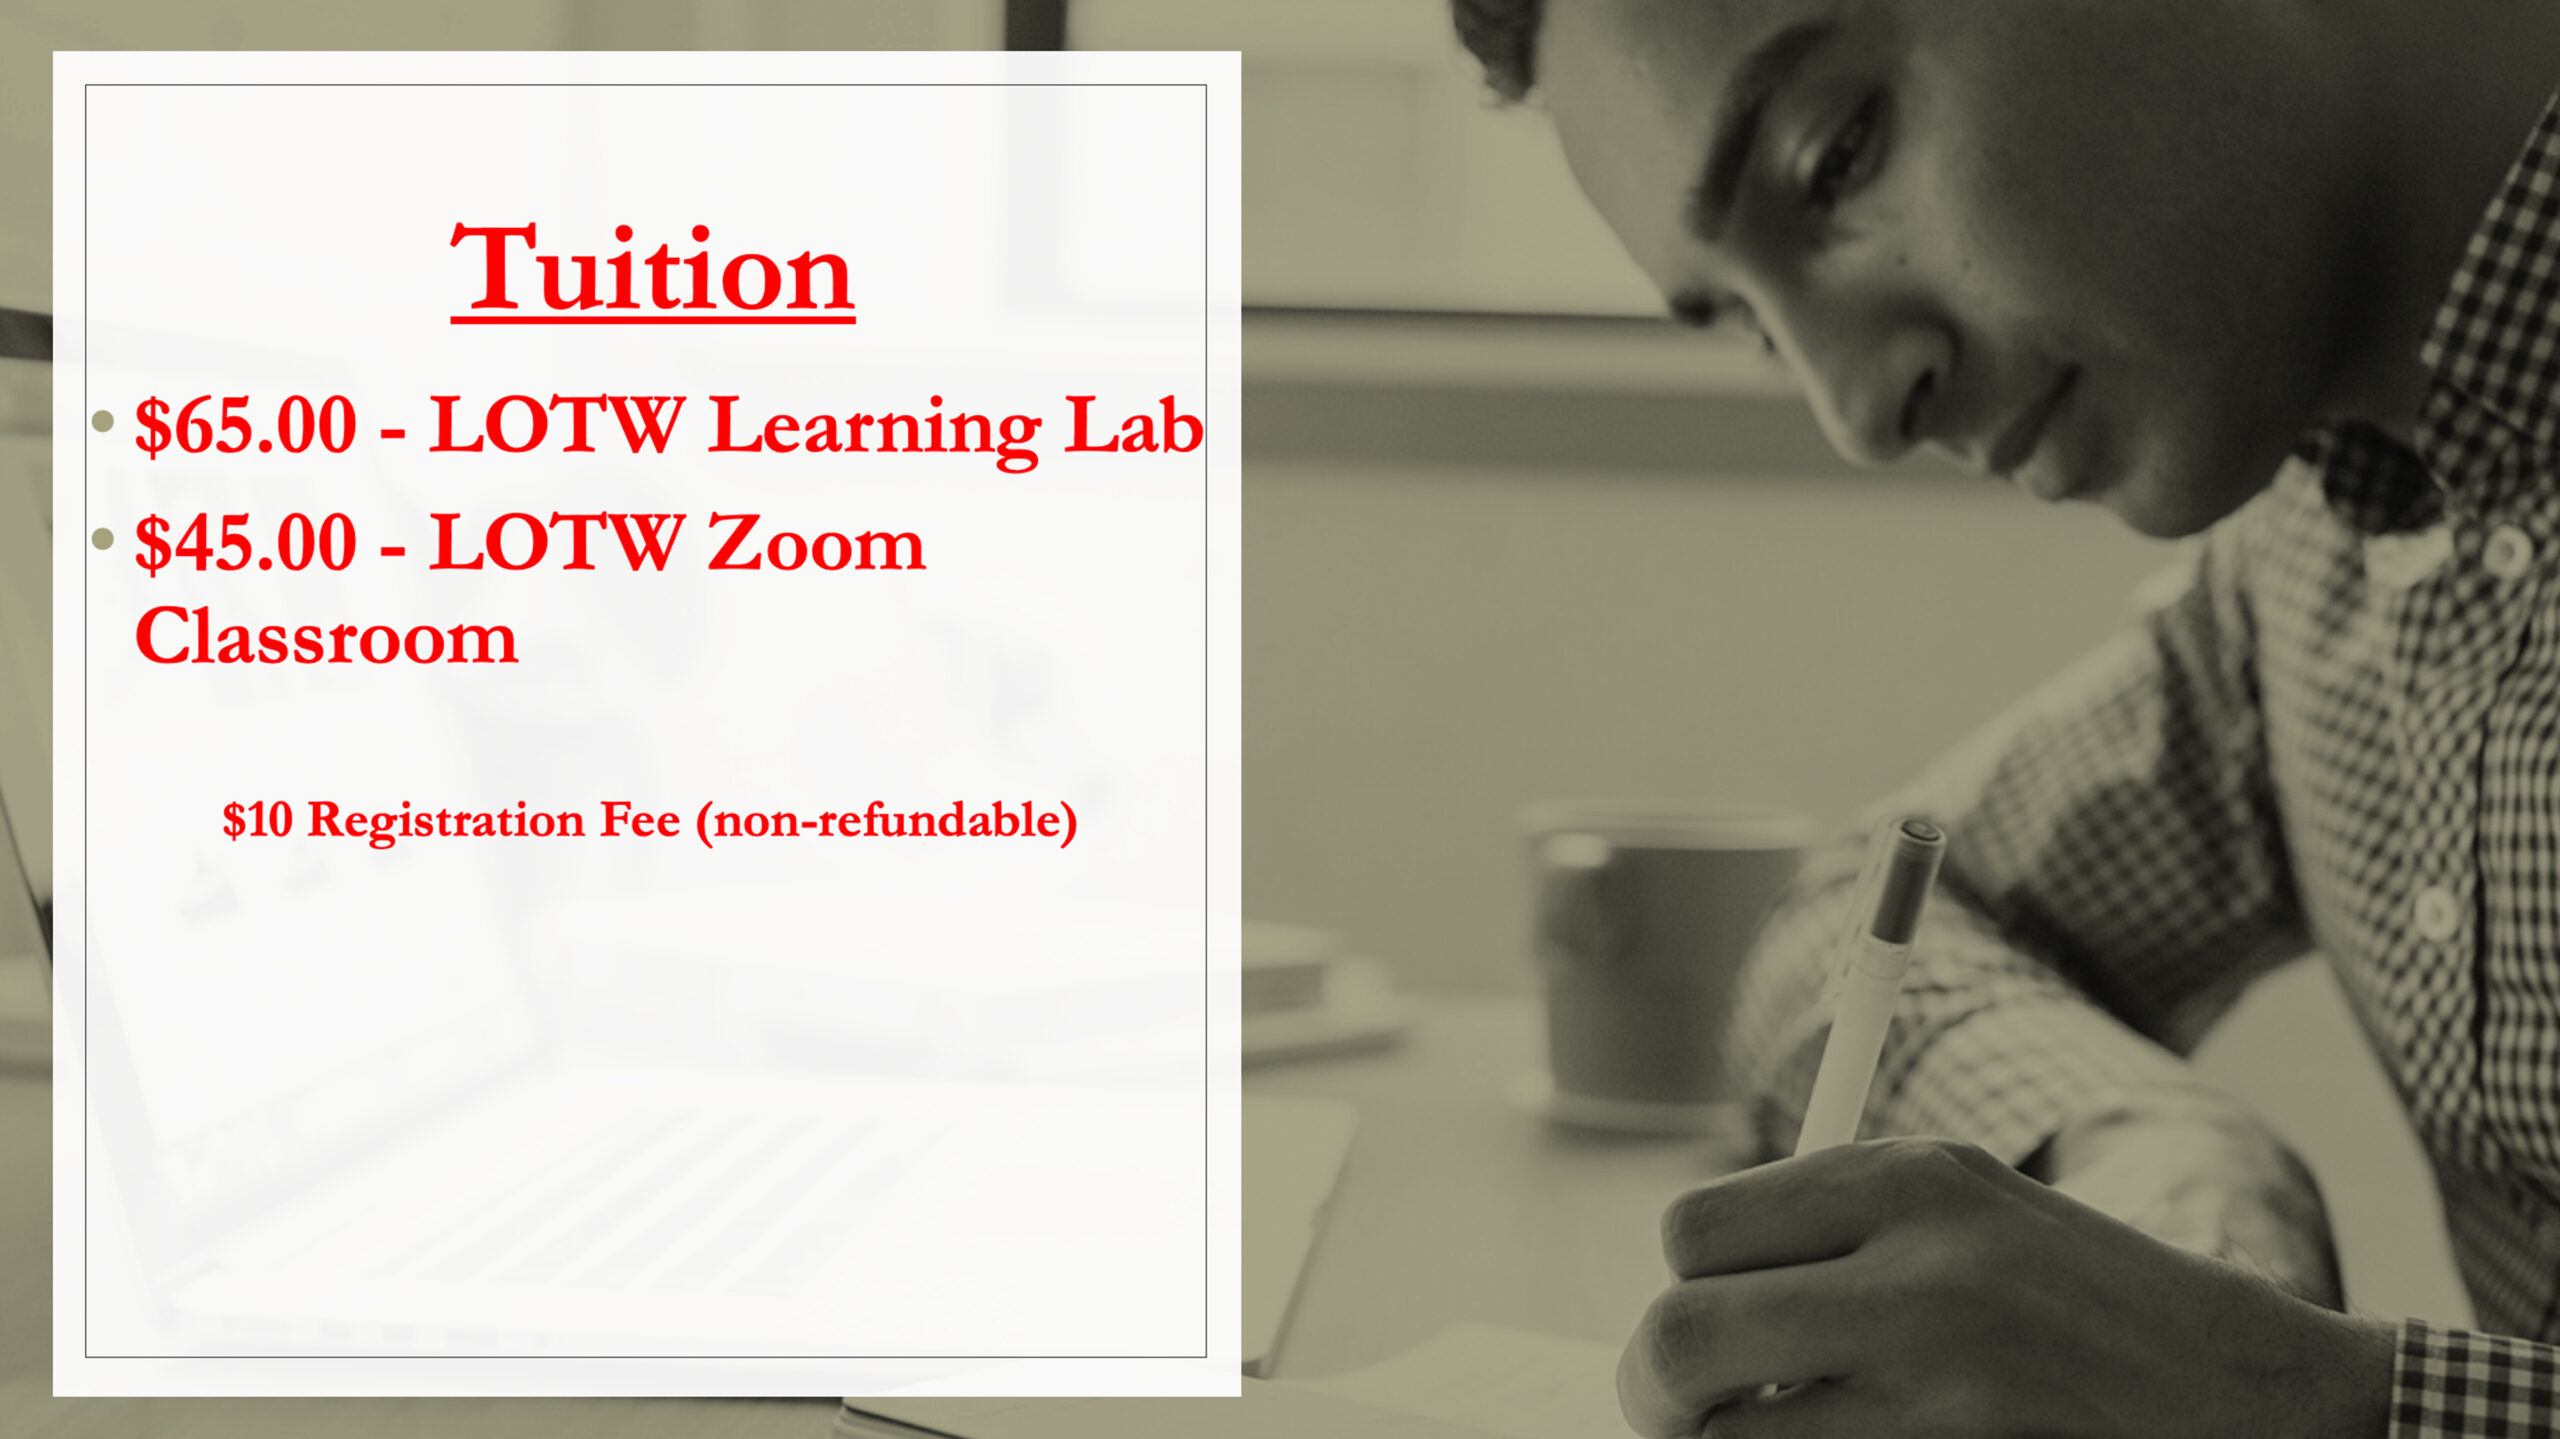 tuition - red text on white background placed on larger background with young adult writing on paper